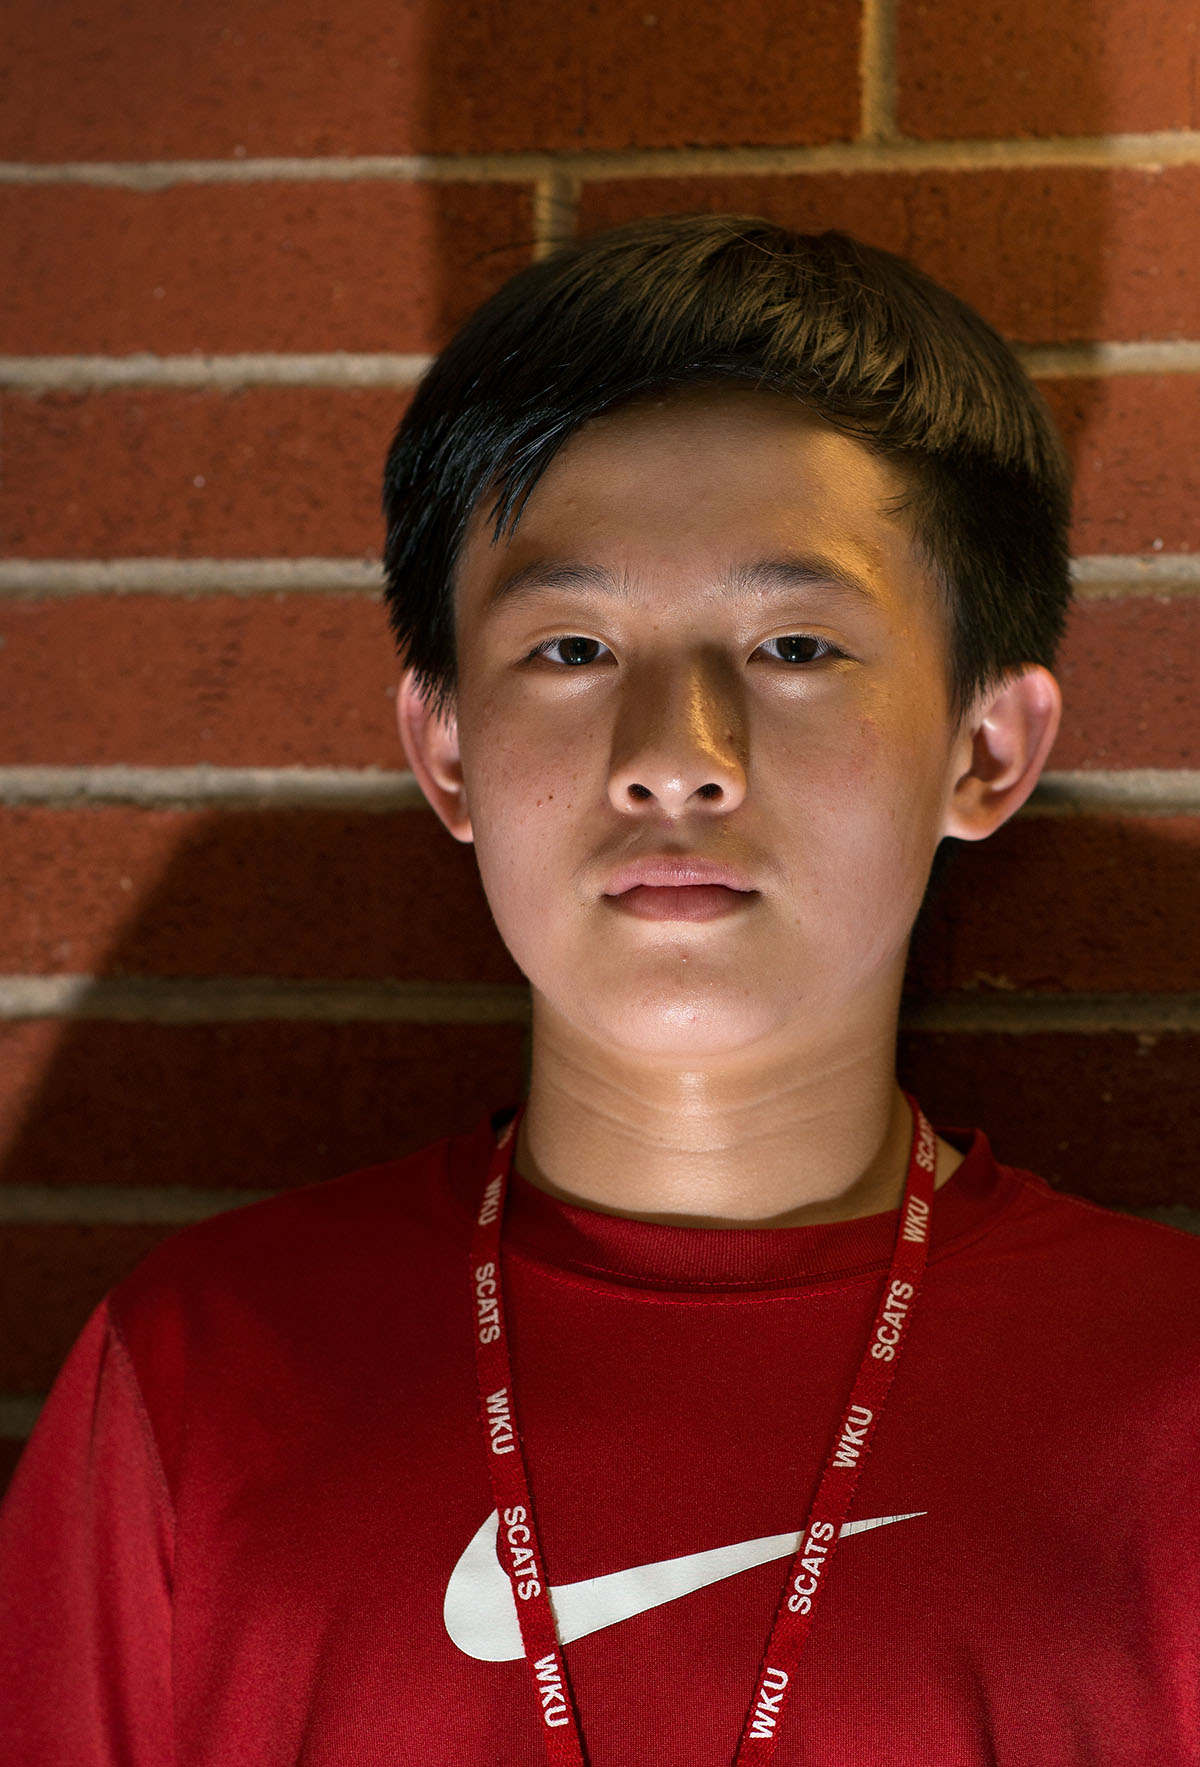 An eighth grader from Nashville, Tennessee, Trevor Zou is at SCATS for the first time and hopes to come to VAMPY in the future. "My favorite parts of SCATS are lunch and optionals," he said. "My favorite optional was ultimate frisbee." (Photo by Tucker Allen Covey)